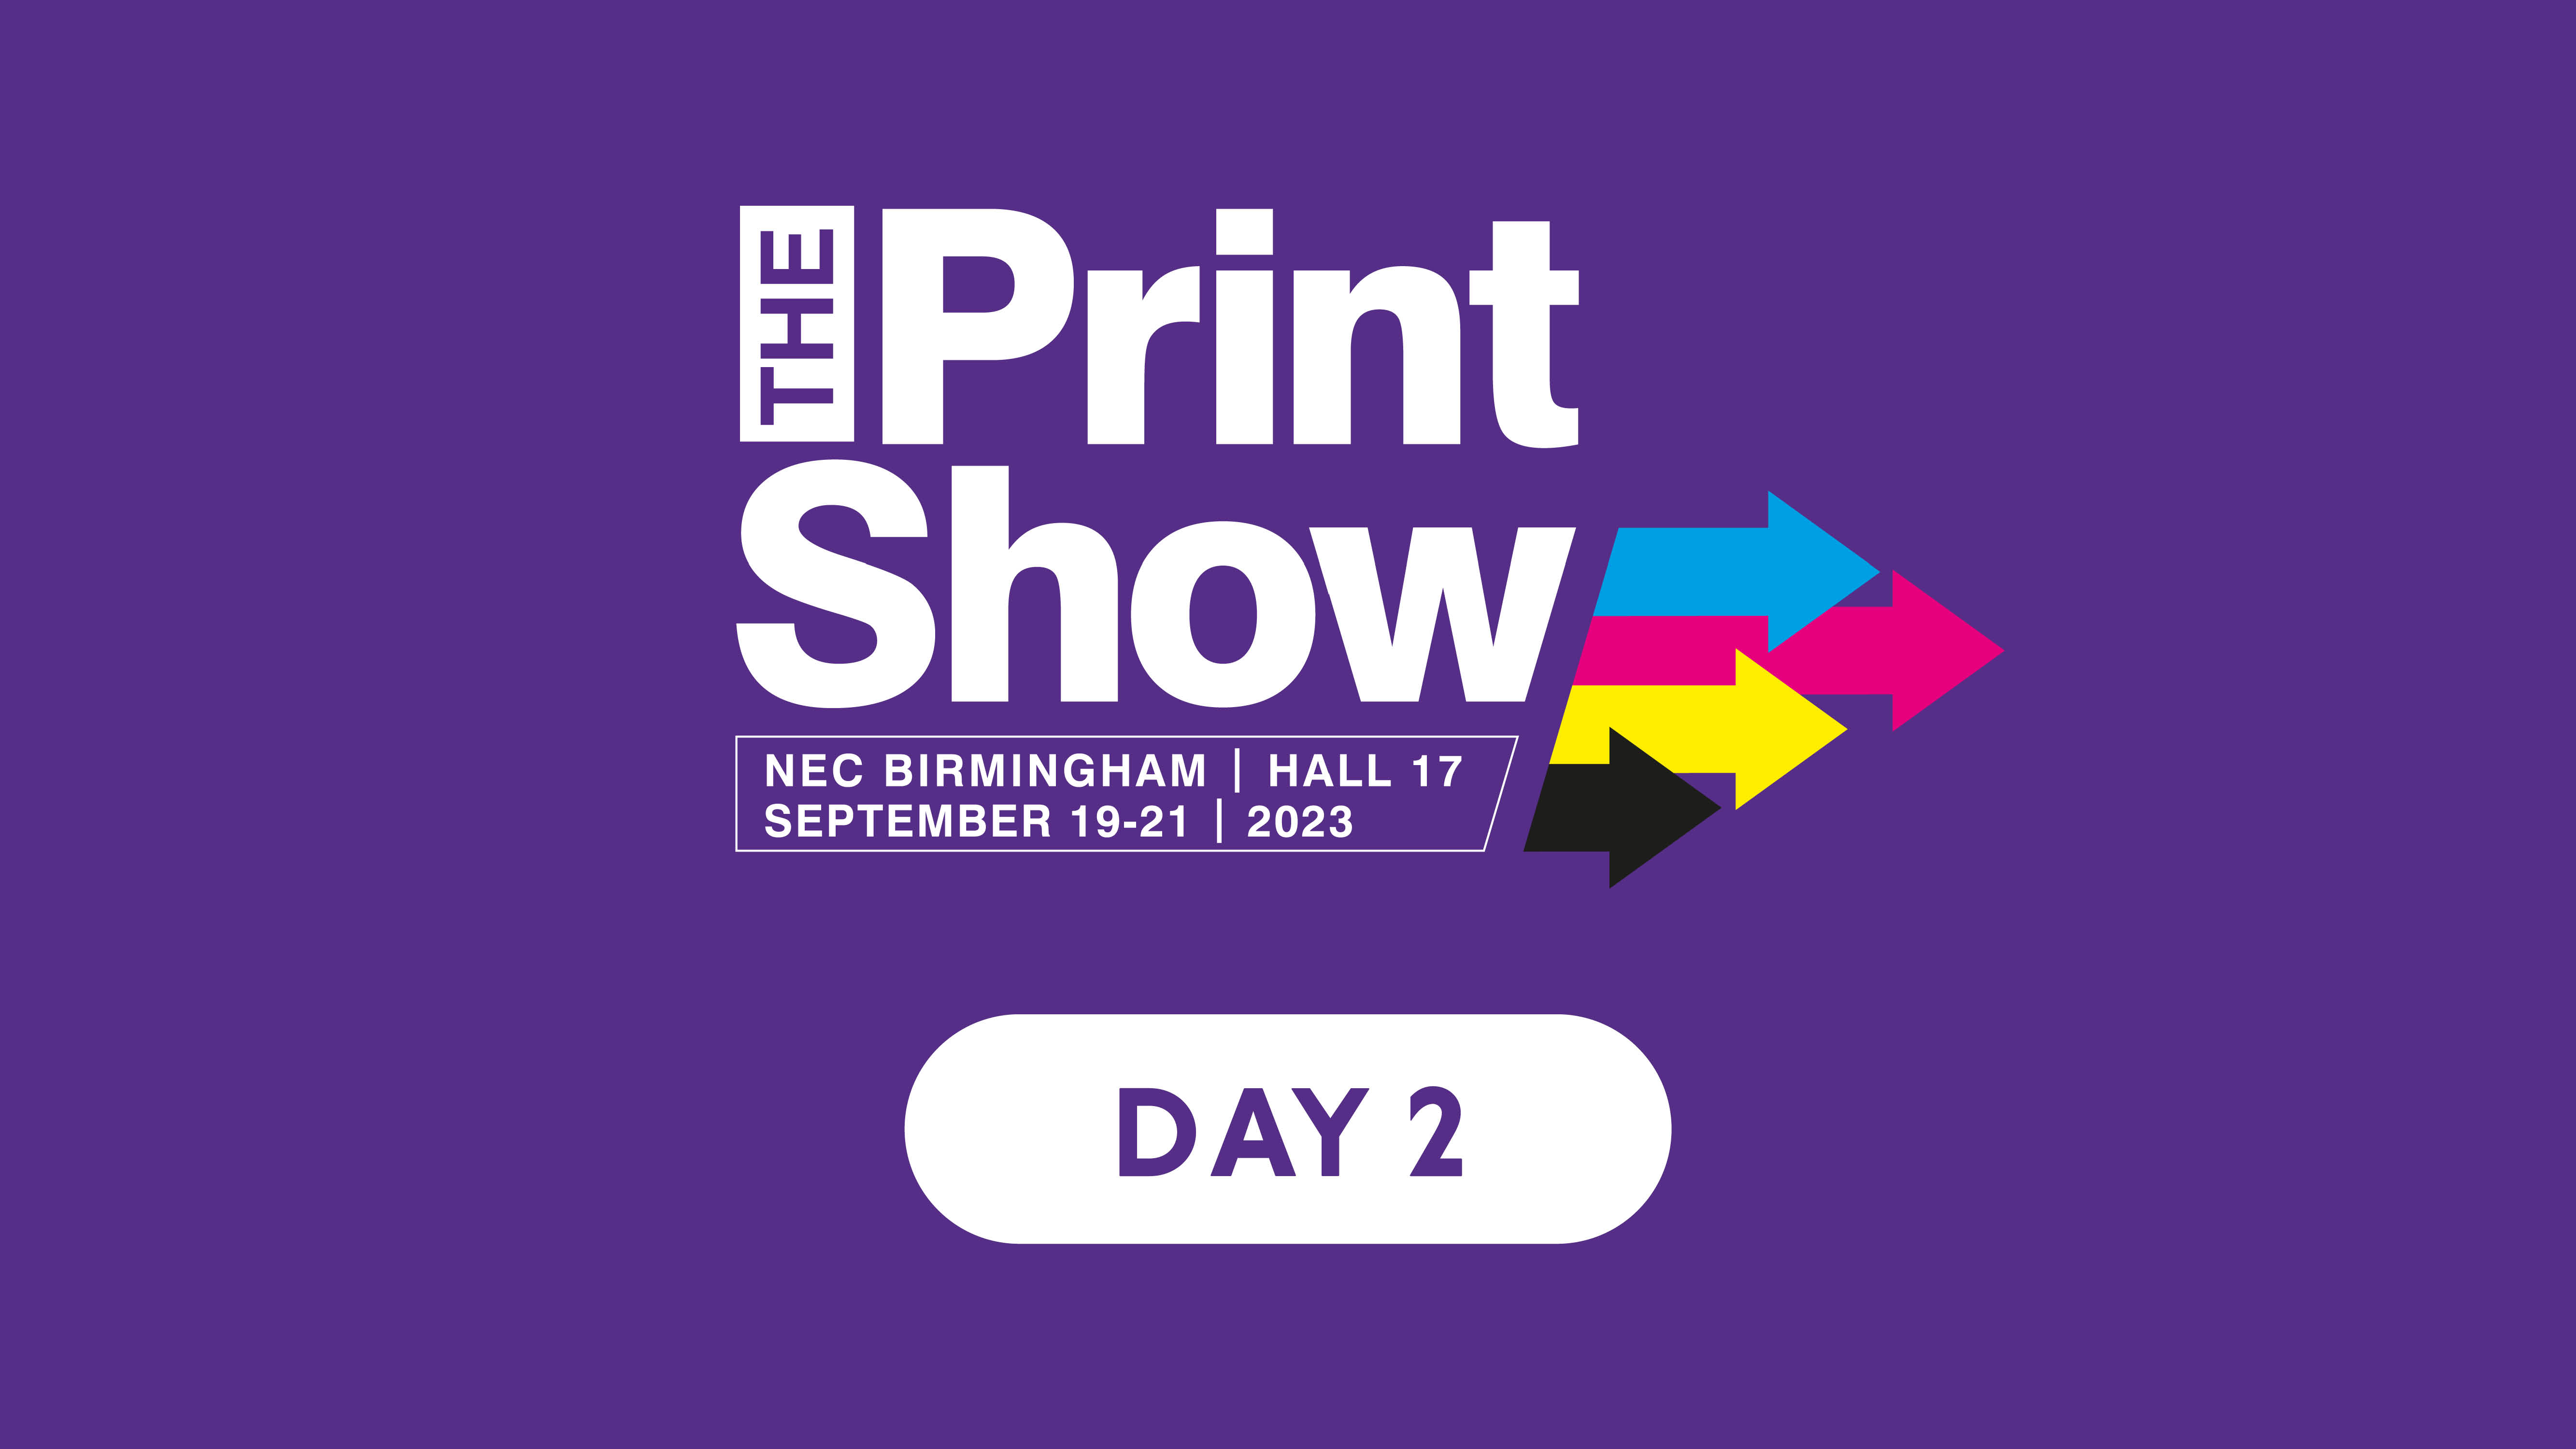 The Print Show 2023 - Day 2